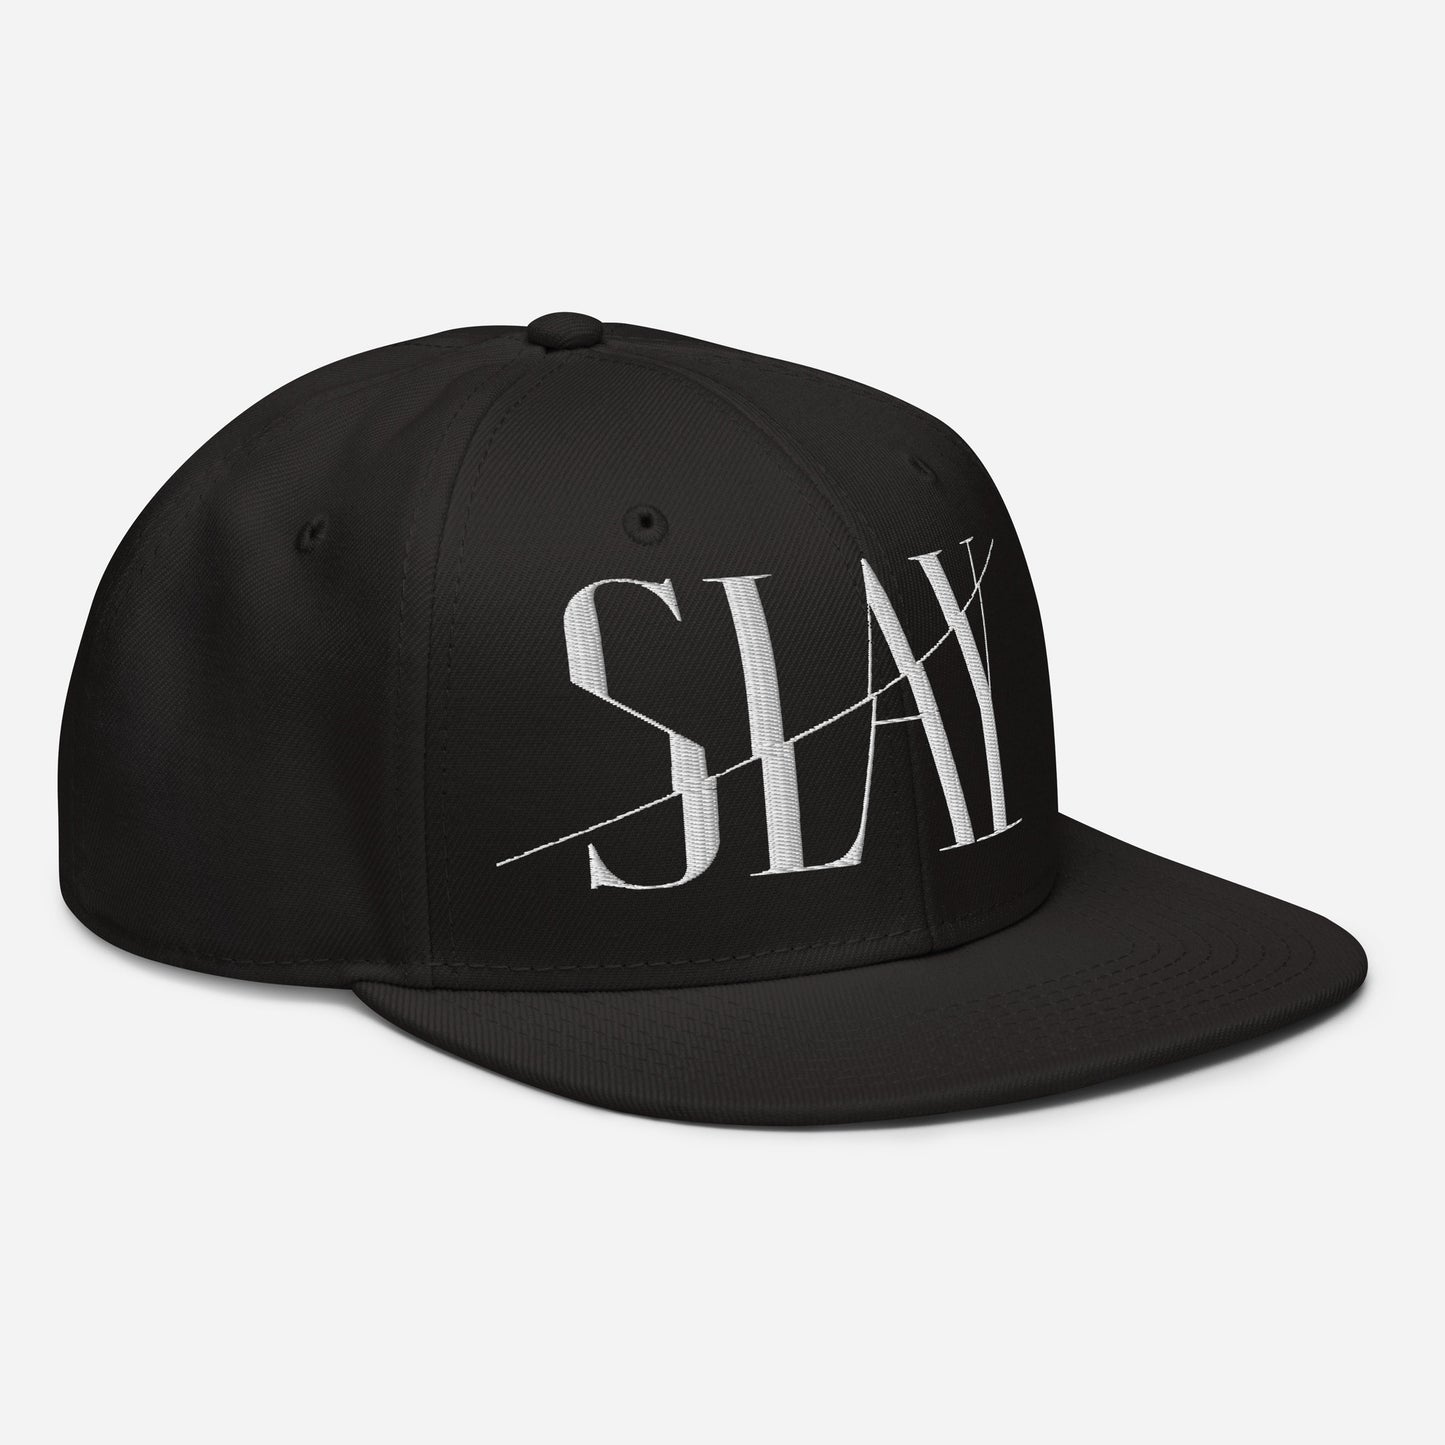 Side view of a black Snapback Hat with the word "SLAY" embroidered on the front.